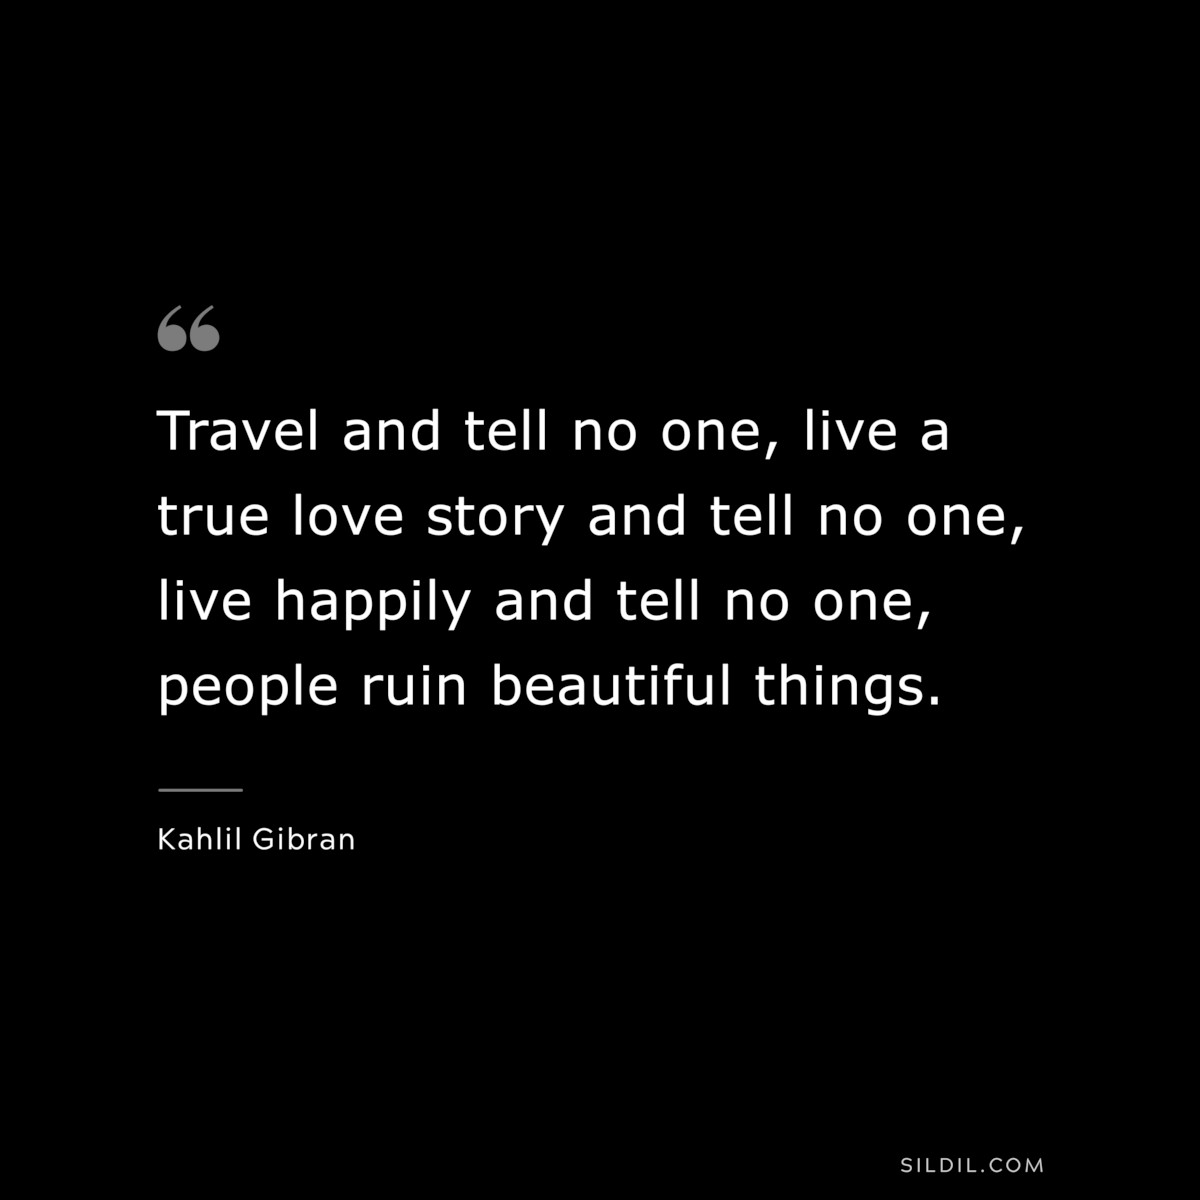 Travel and tell no one, live a true love story and tell no one, live happily and tell no one, people ruin beautiful things. ― Kahlil Gibran